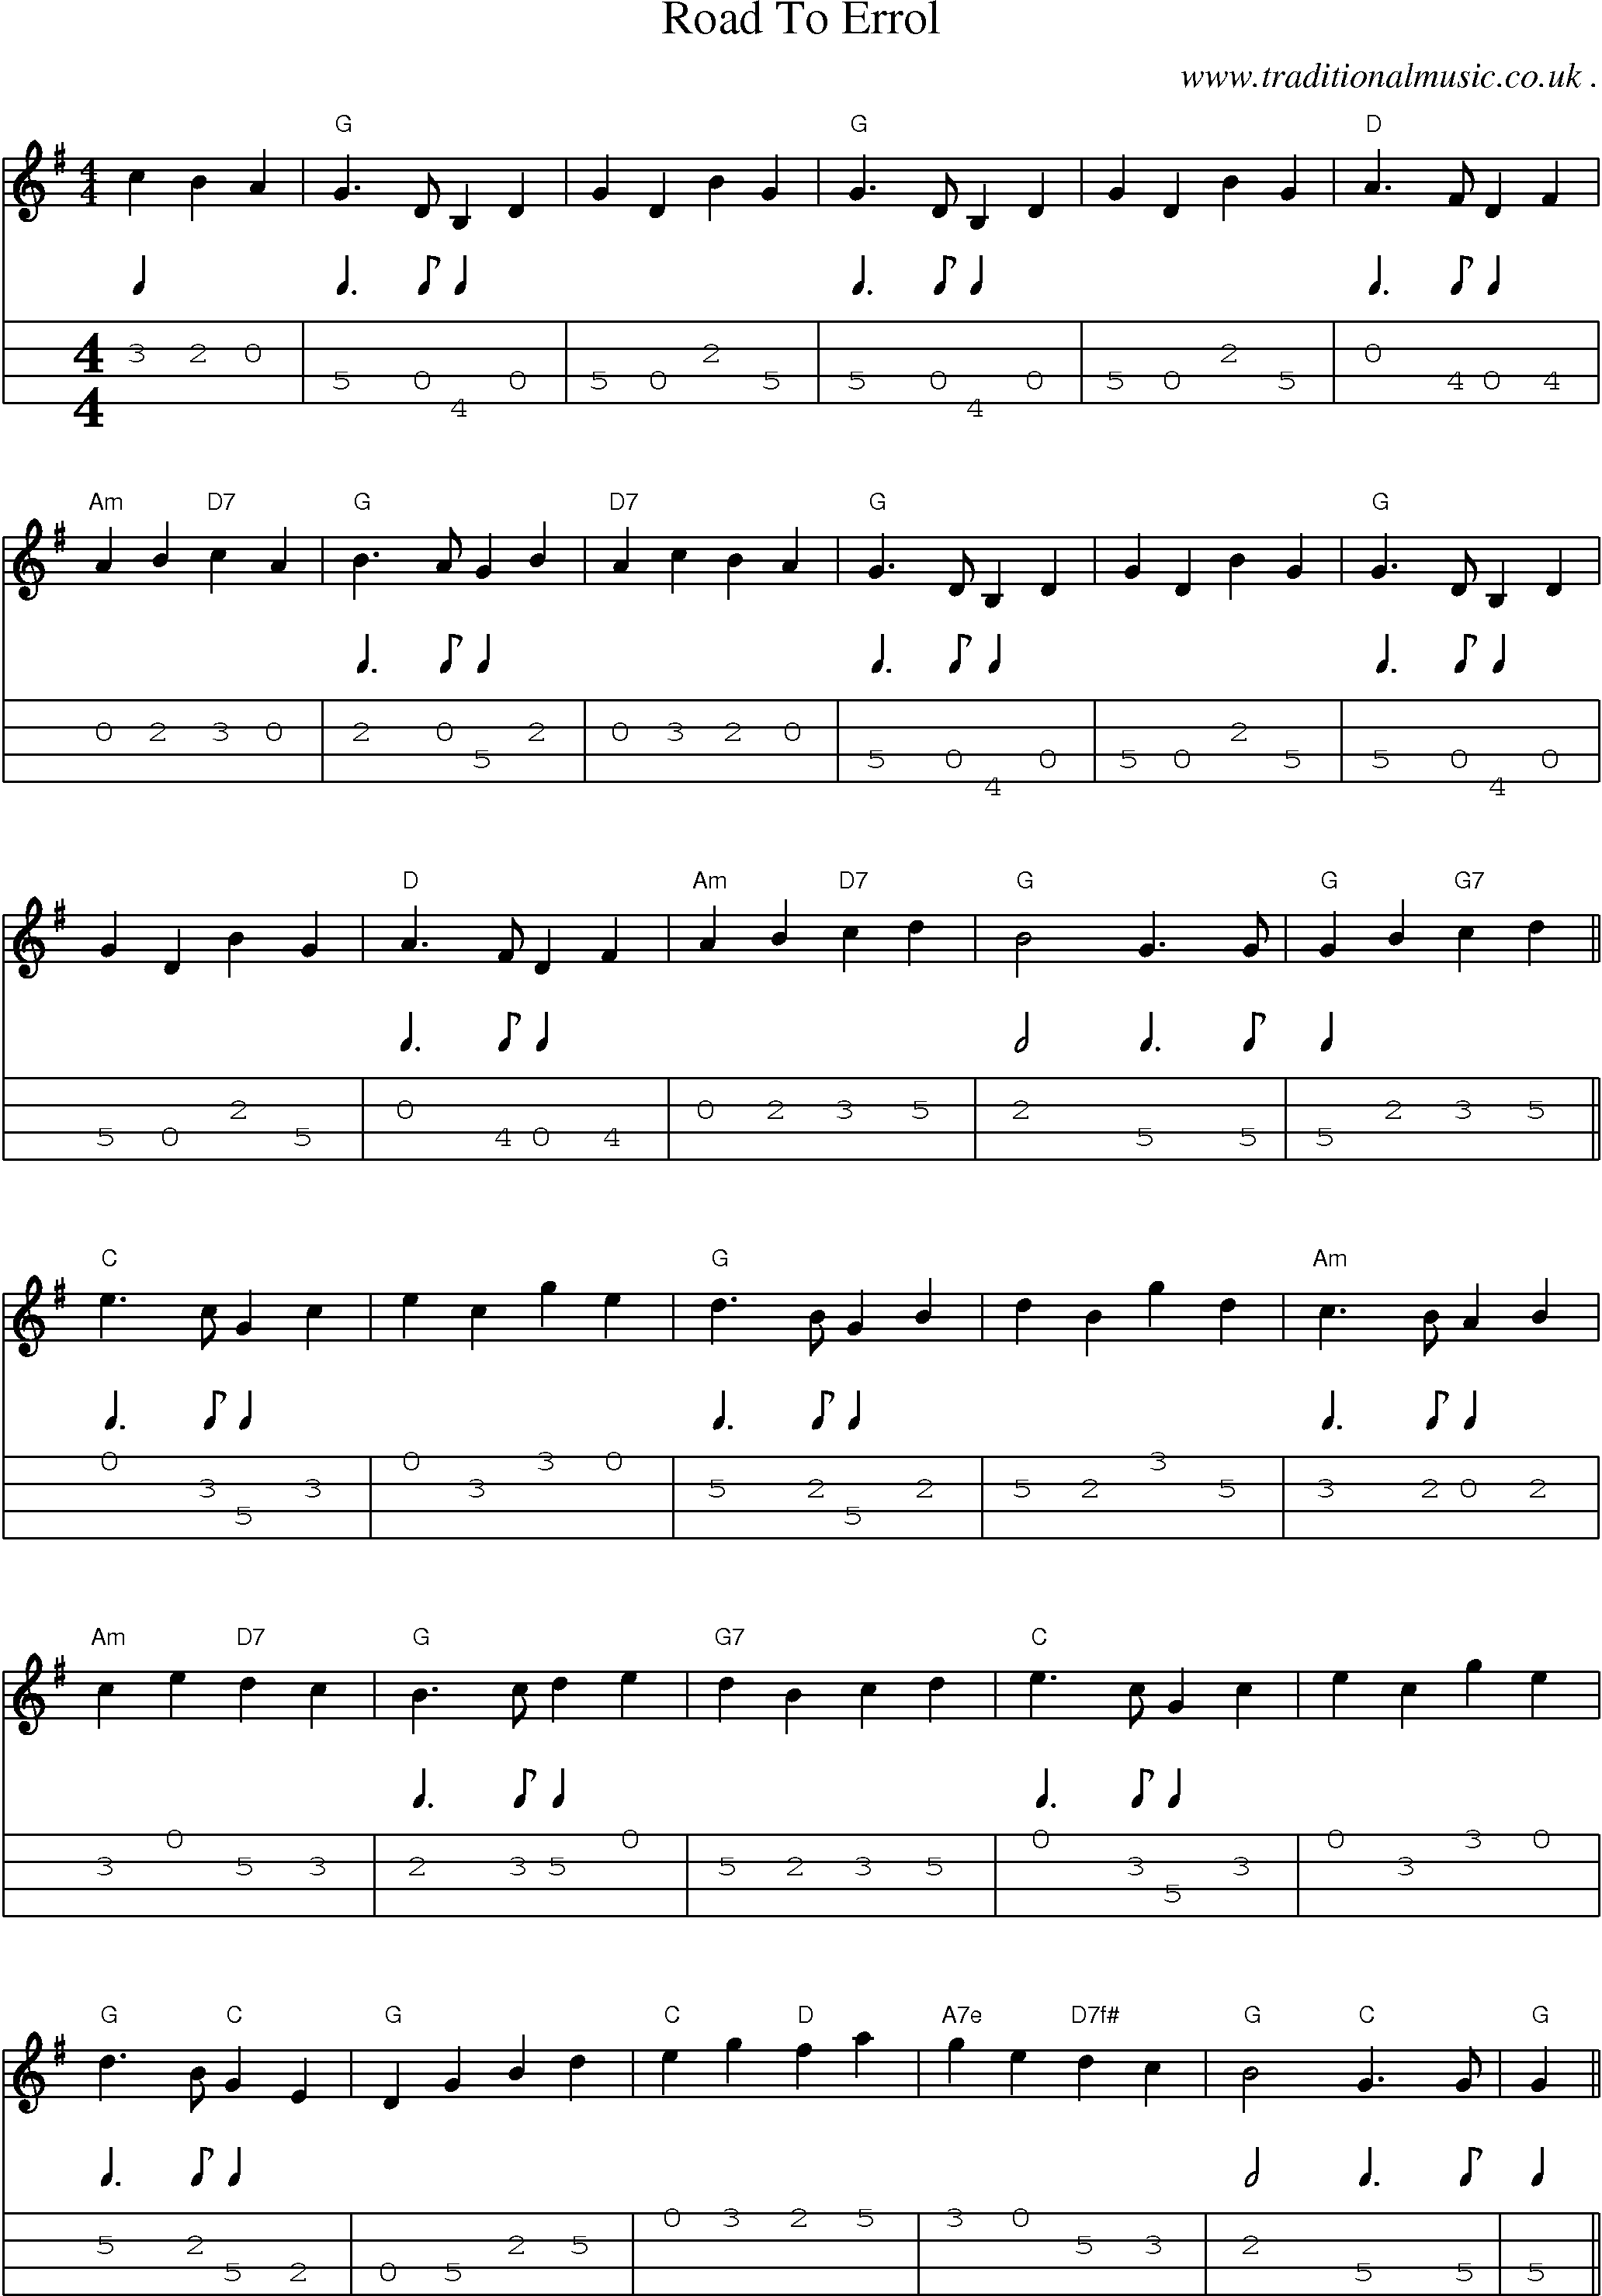 Sheet-Music and Mandolin Tabs for Road To Errol